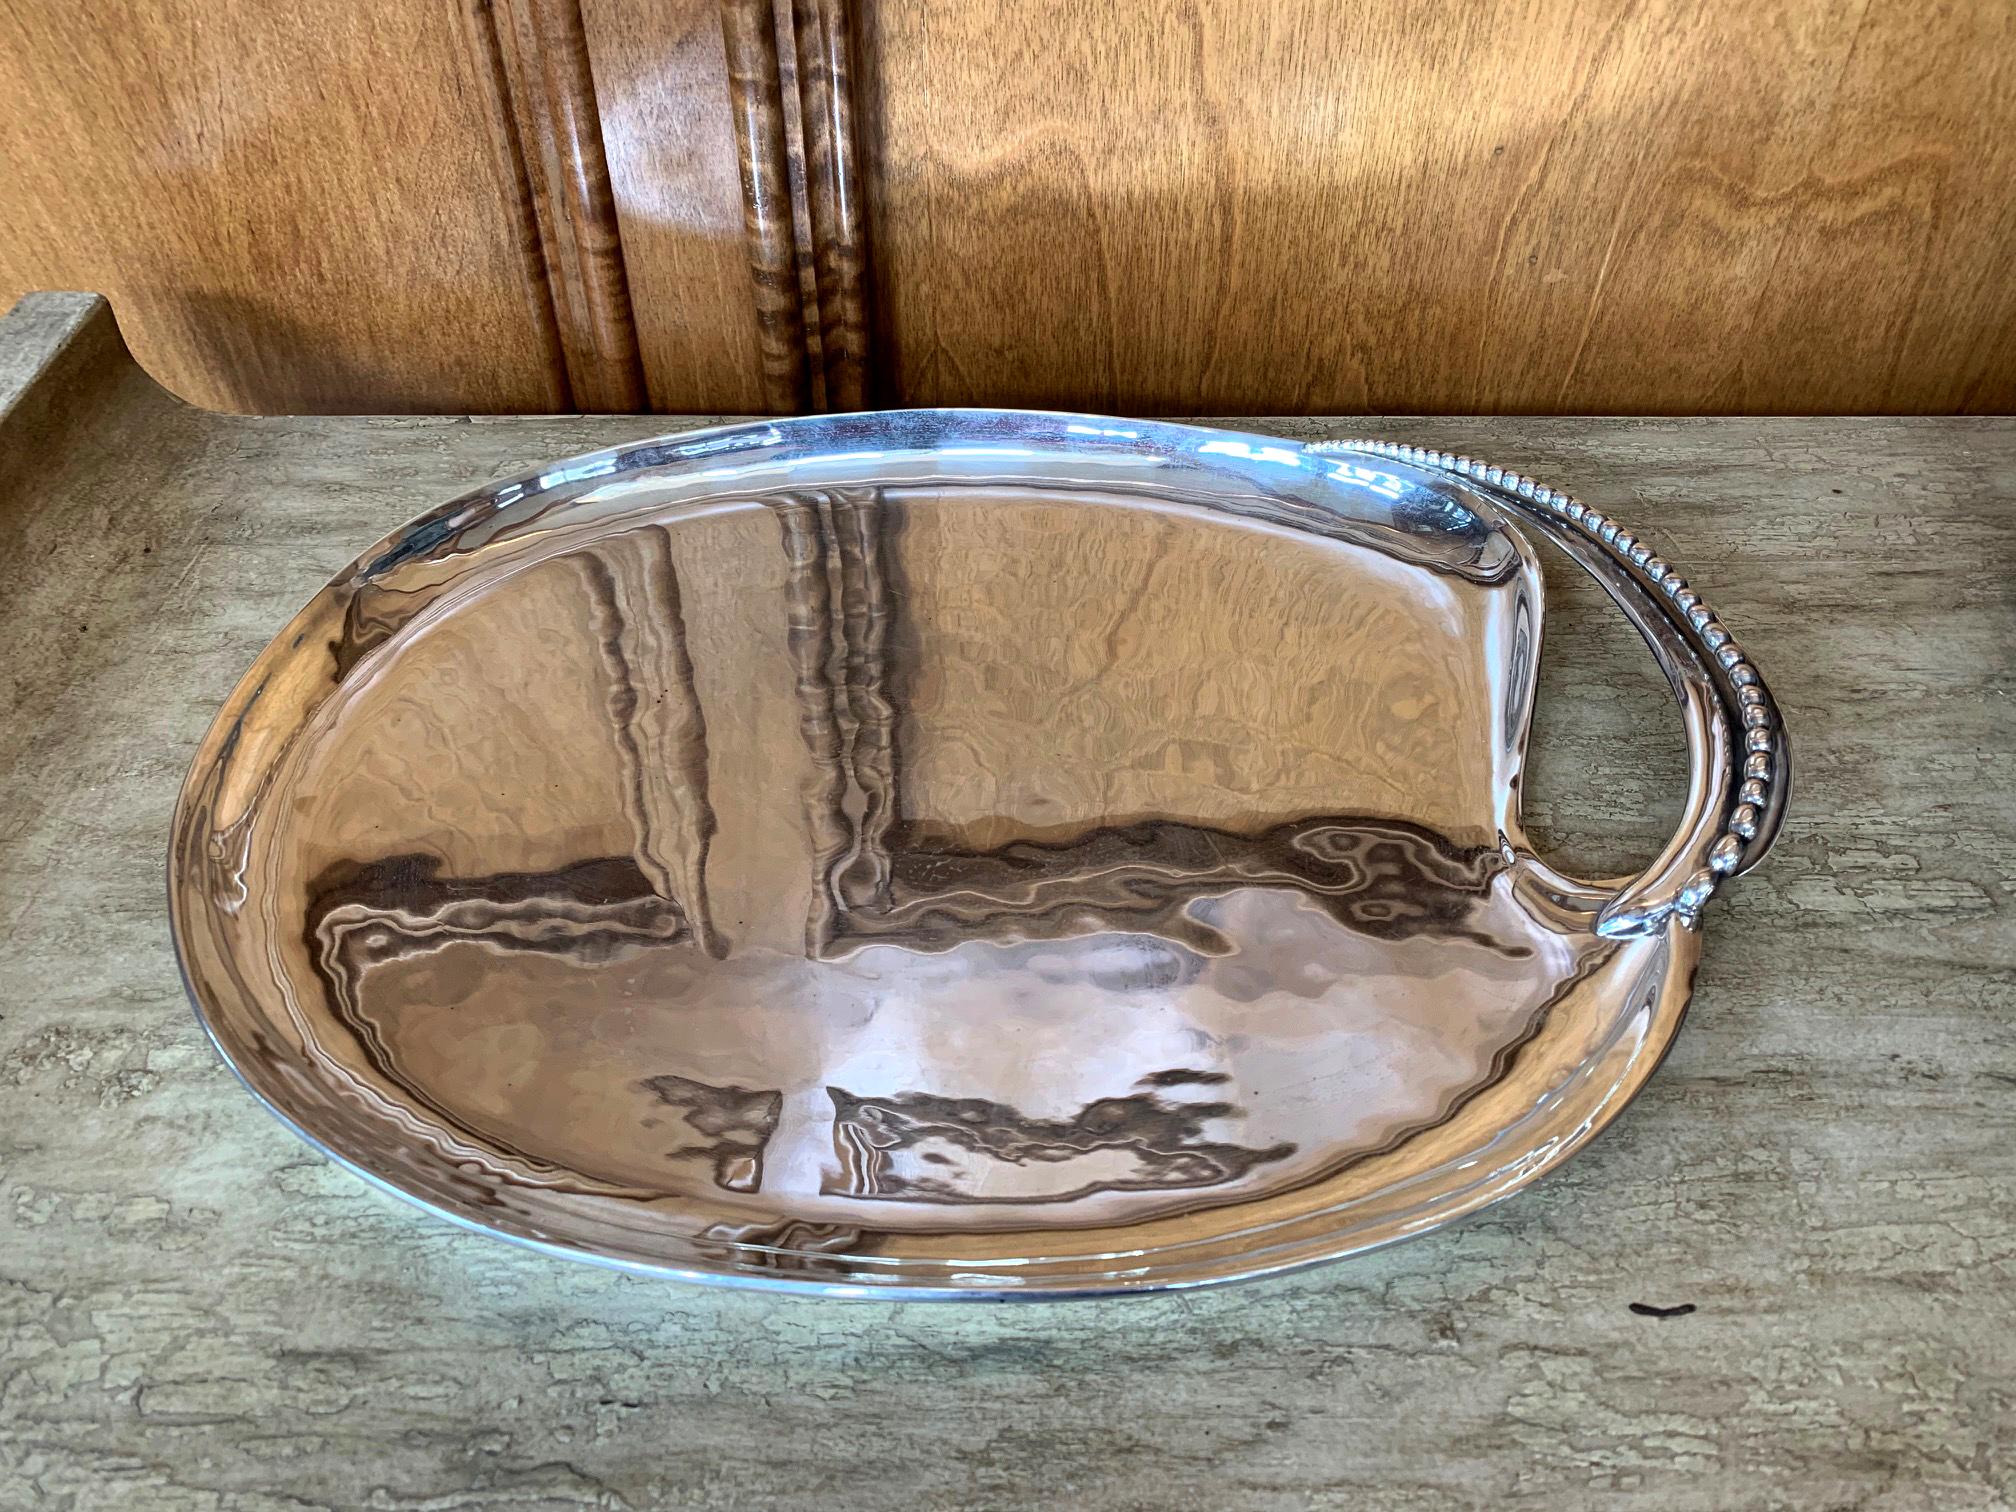 A Mexican modernist sterling silver tray by well known silversmith Antonio Pineda (1919-2009). The handsome silver tray with a subtle hammered surface was crown marked by the artist's logo circa 1953-1979, made in his studio in Taxco, Mexico. It was